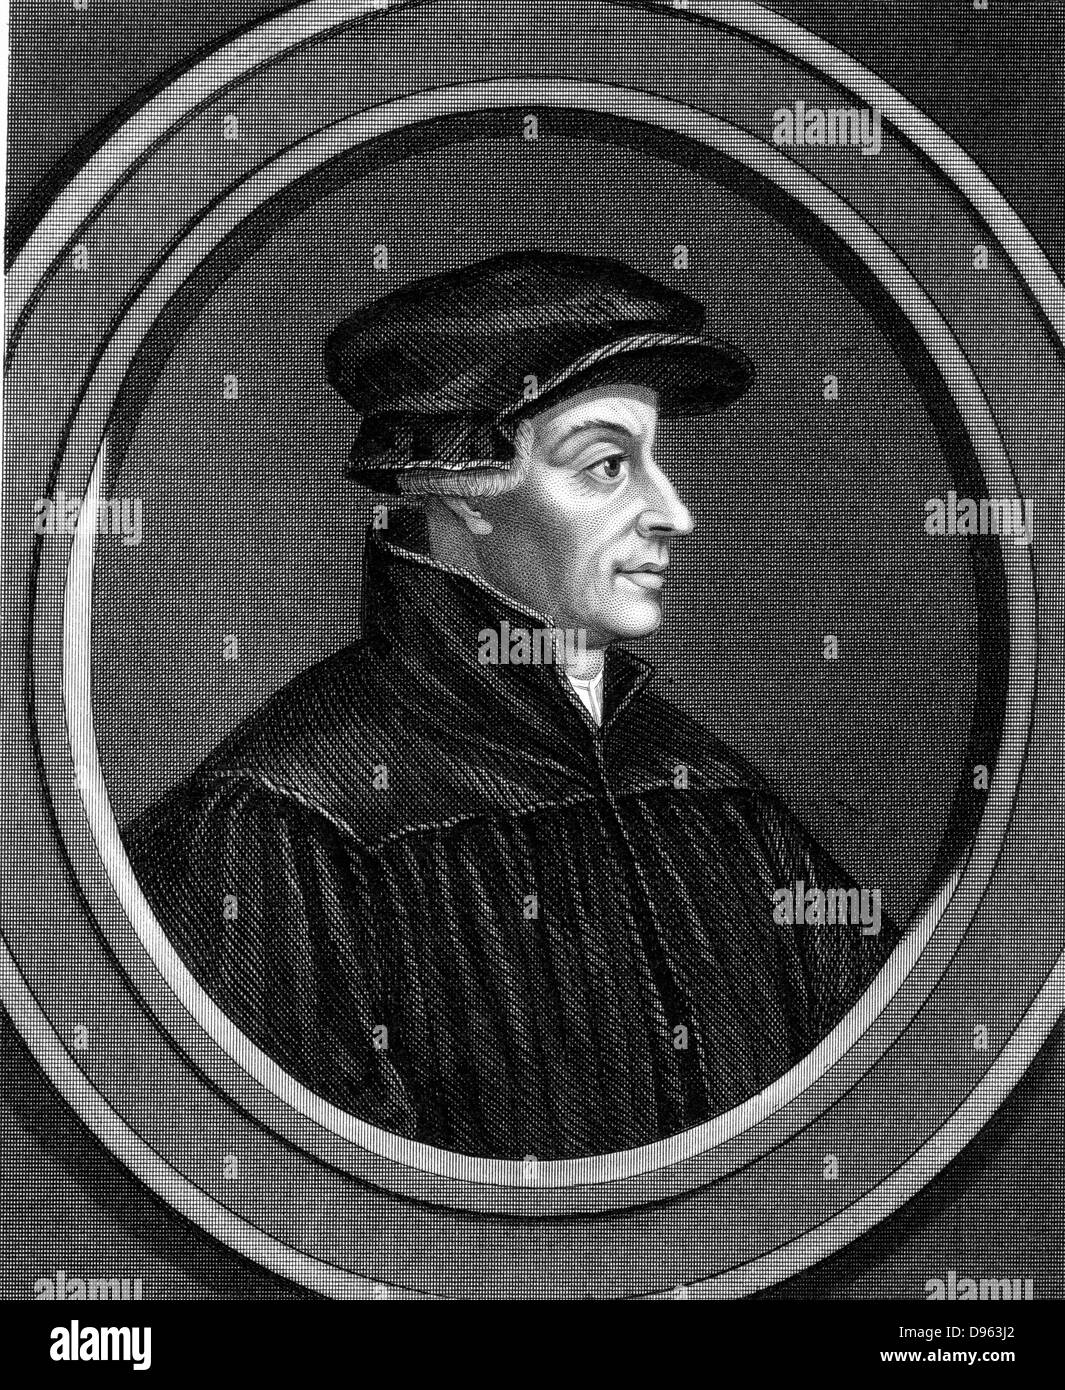 Ulrich Zwingli (1481-1531) Swiss Reformation divine. Chaplain to Swiss forces during Second War of Kappel when he was killed in battle. Steel engraving, 1851 Stock Photo